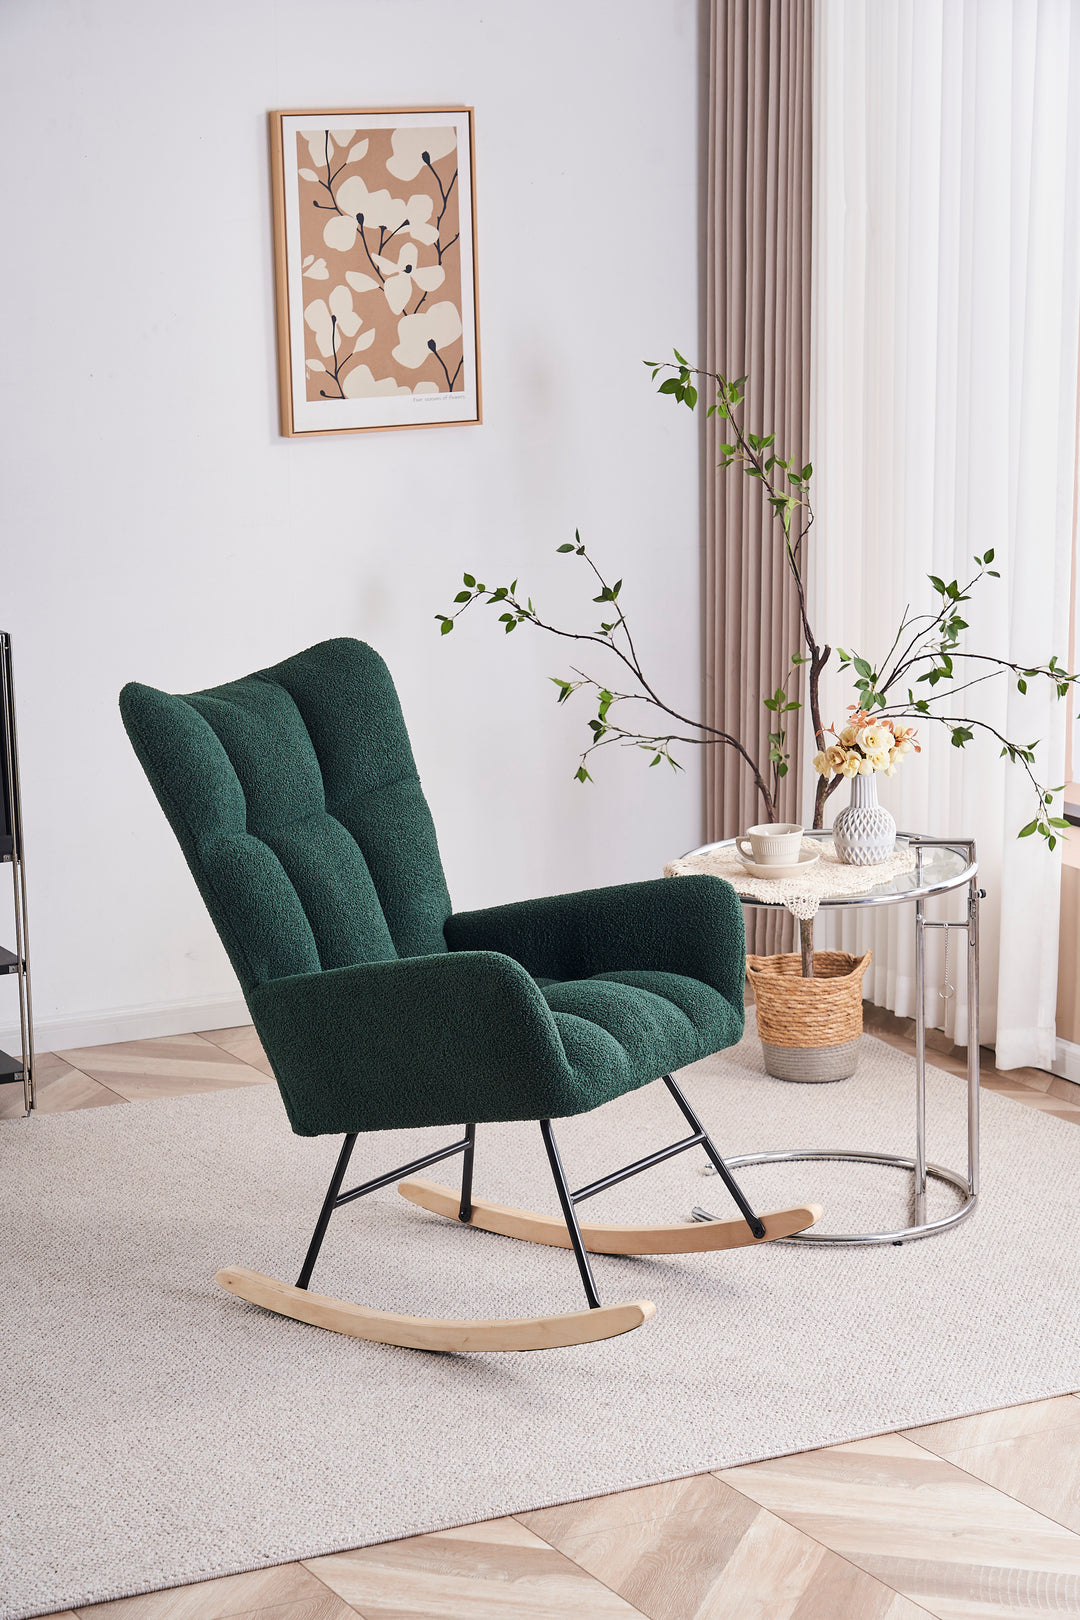 Rocking Chair Nursery, Solid Wood Legs Reading Chair with Teddy Fabric Upholstered , Nap Armchair for Living Rooms, Bedrooms, Offices, Best Gift,Emerald Teddy fabric